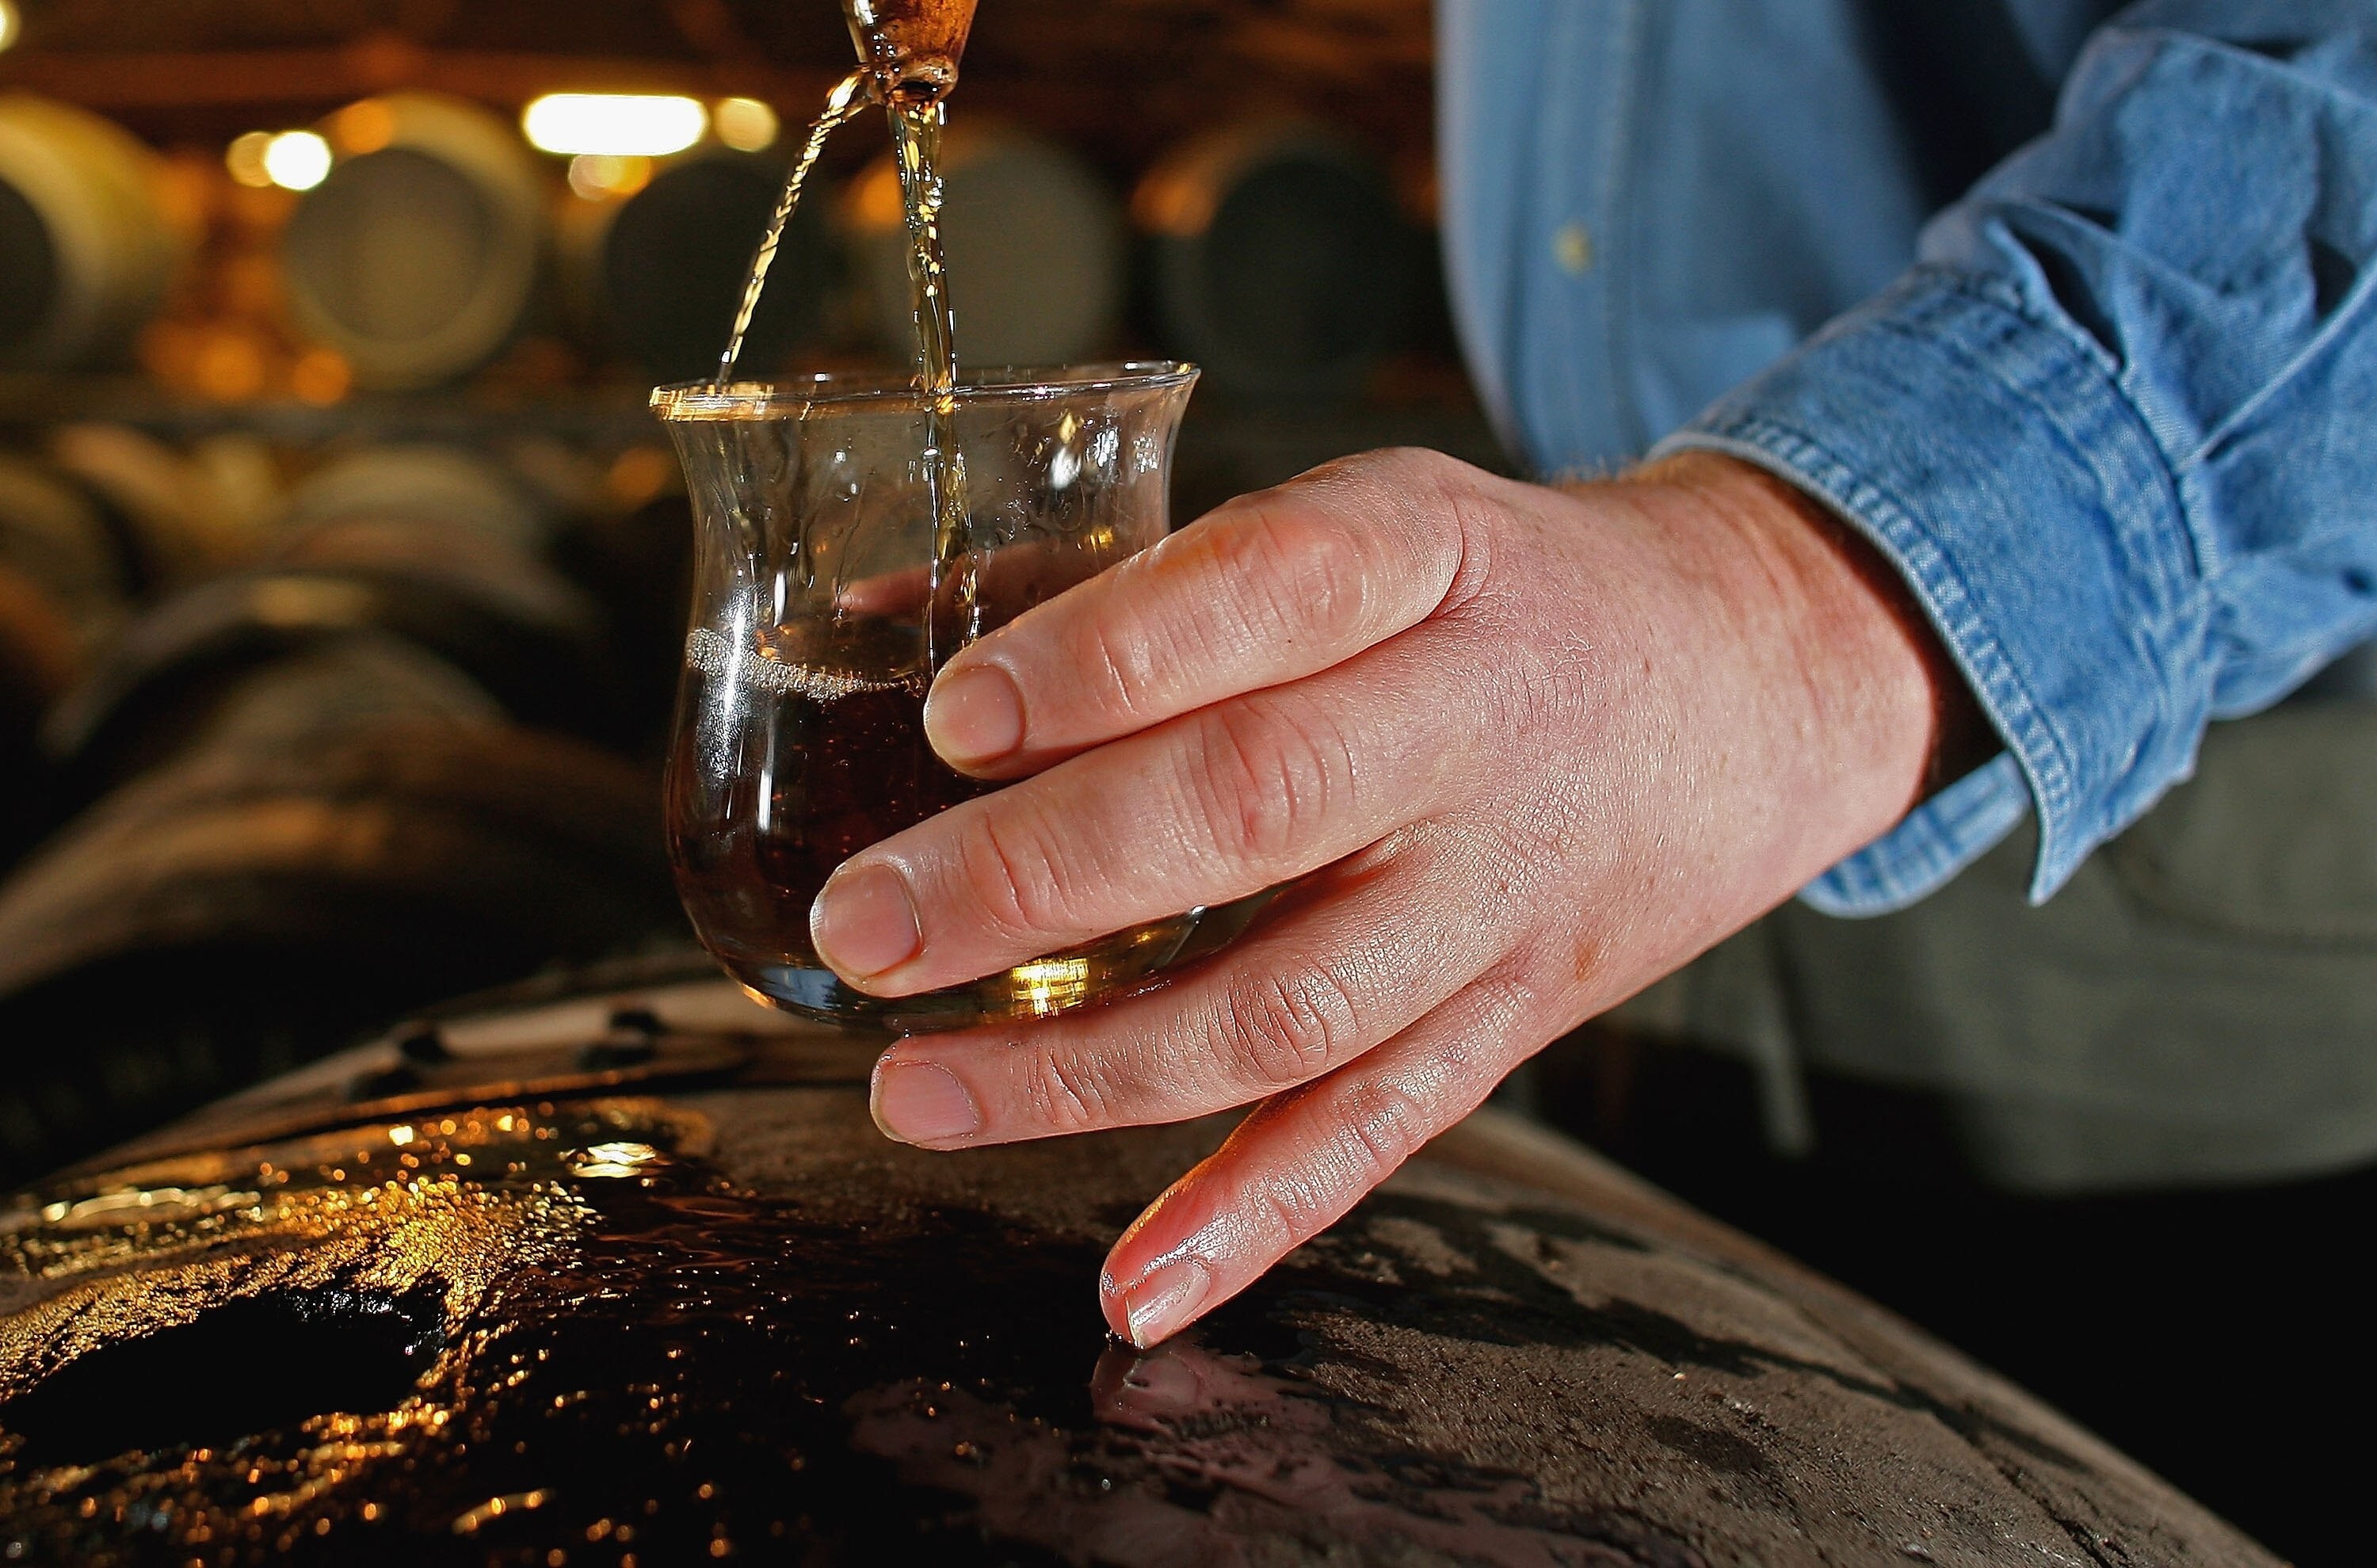 A worker at Bruichladdich distillery takes a whisky sample from a cask. Photo: Getty Images